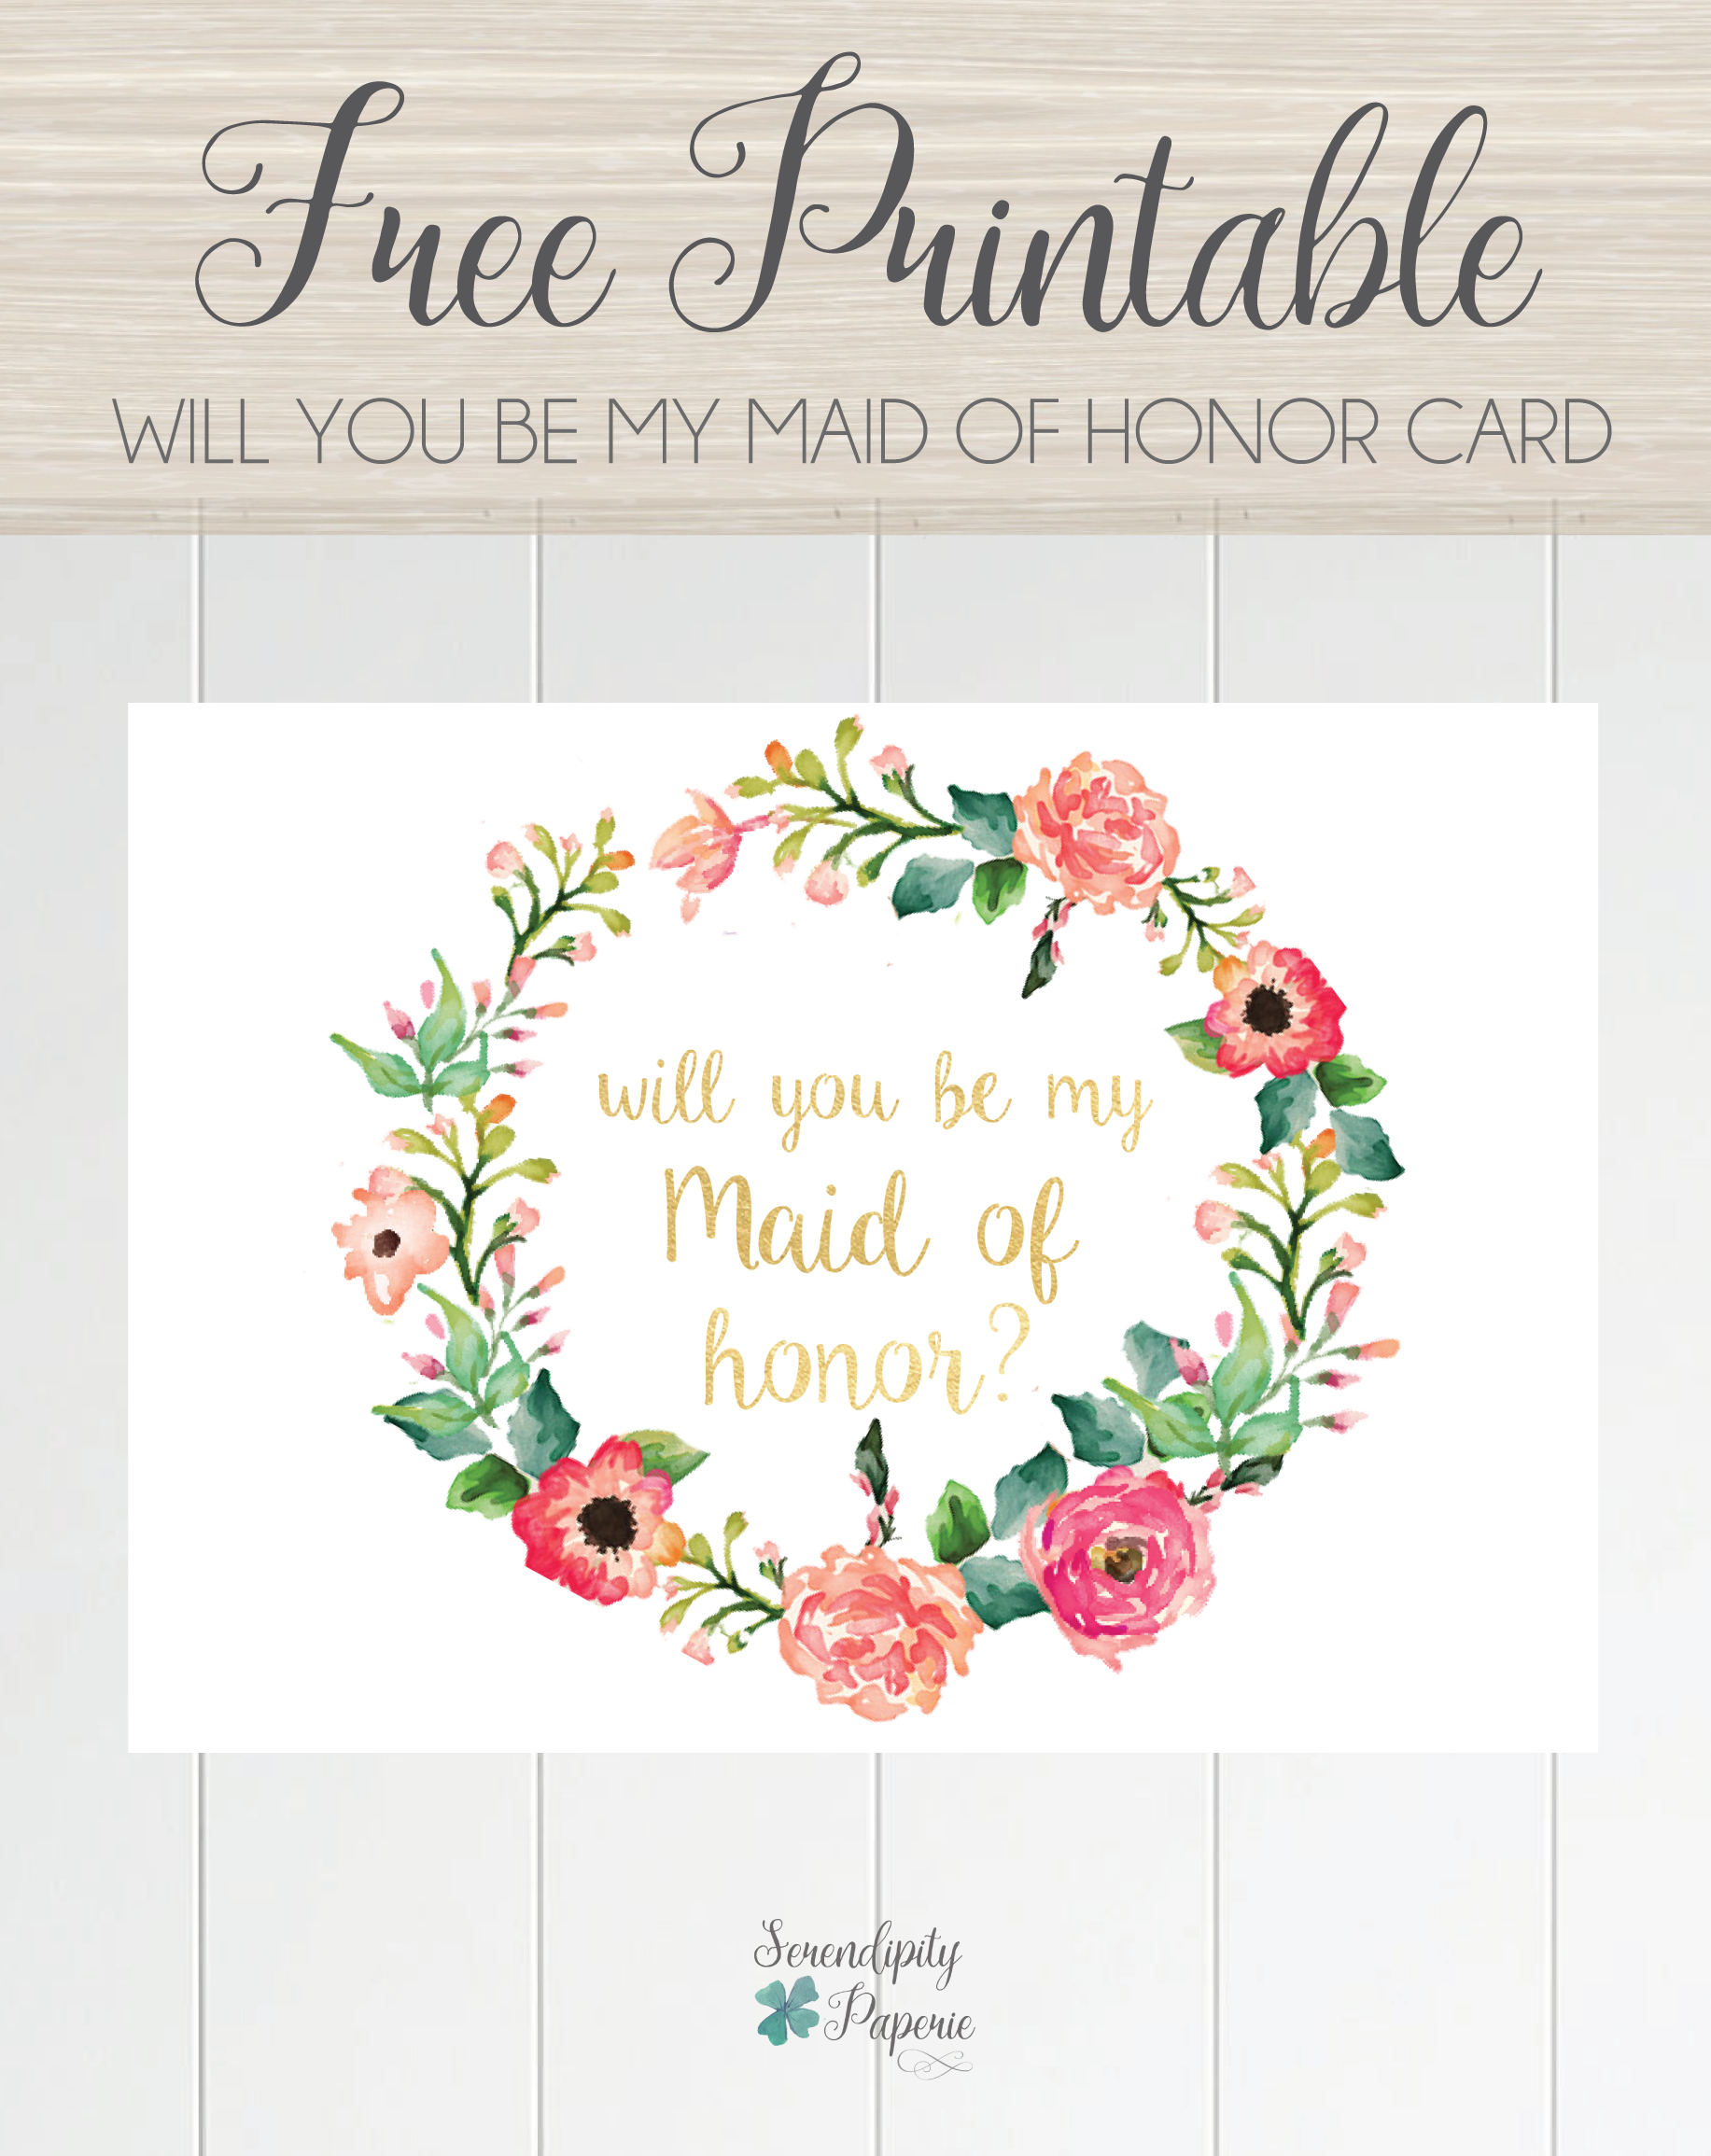 Free Printable Will You Be My Maid Of Honor Card, Floral Wreath - Free Printable Will You Be My Maid Of Honor Card